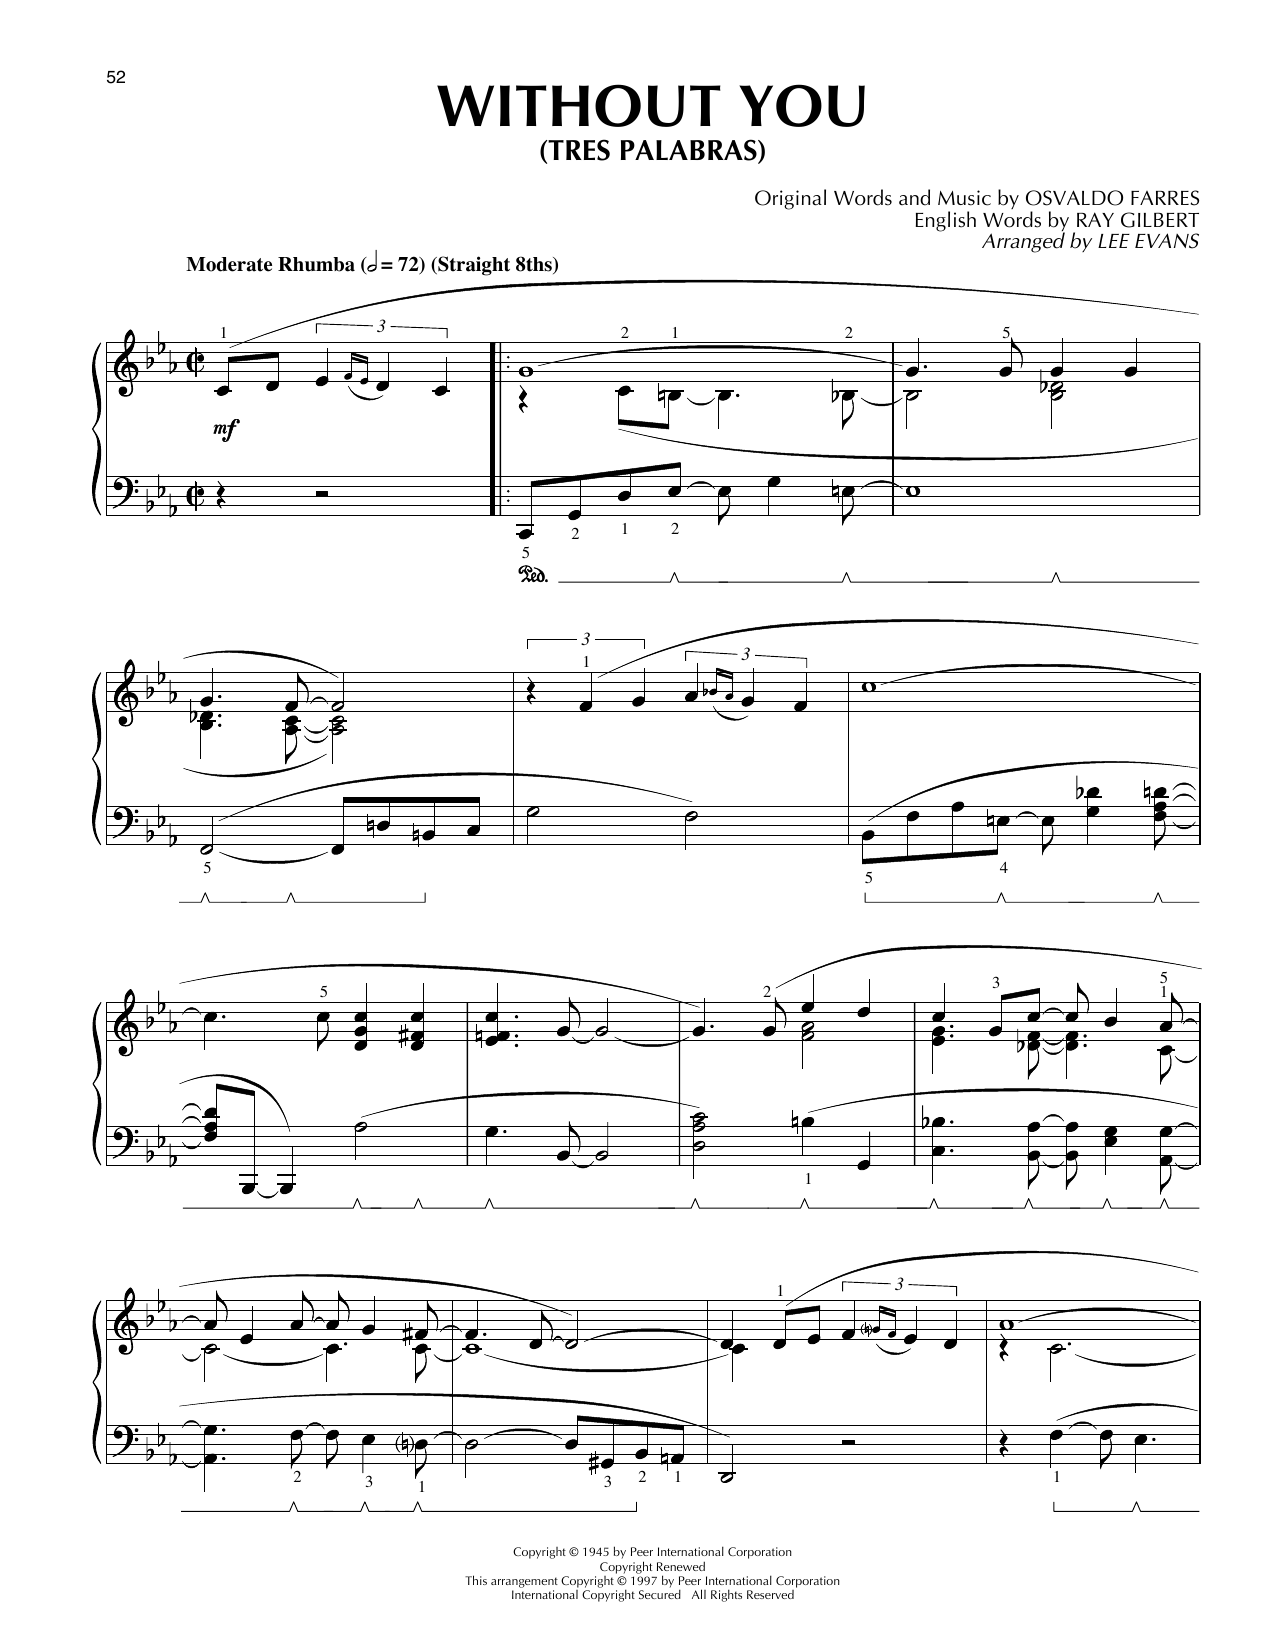 Download Nat King Cole Tres Palabras (Without You) Sheet Music